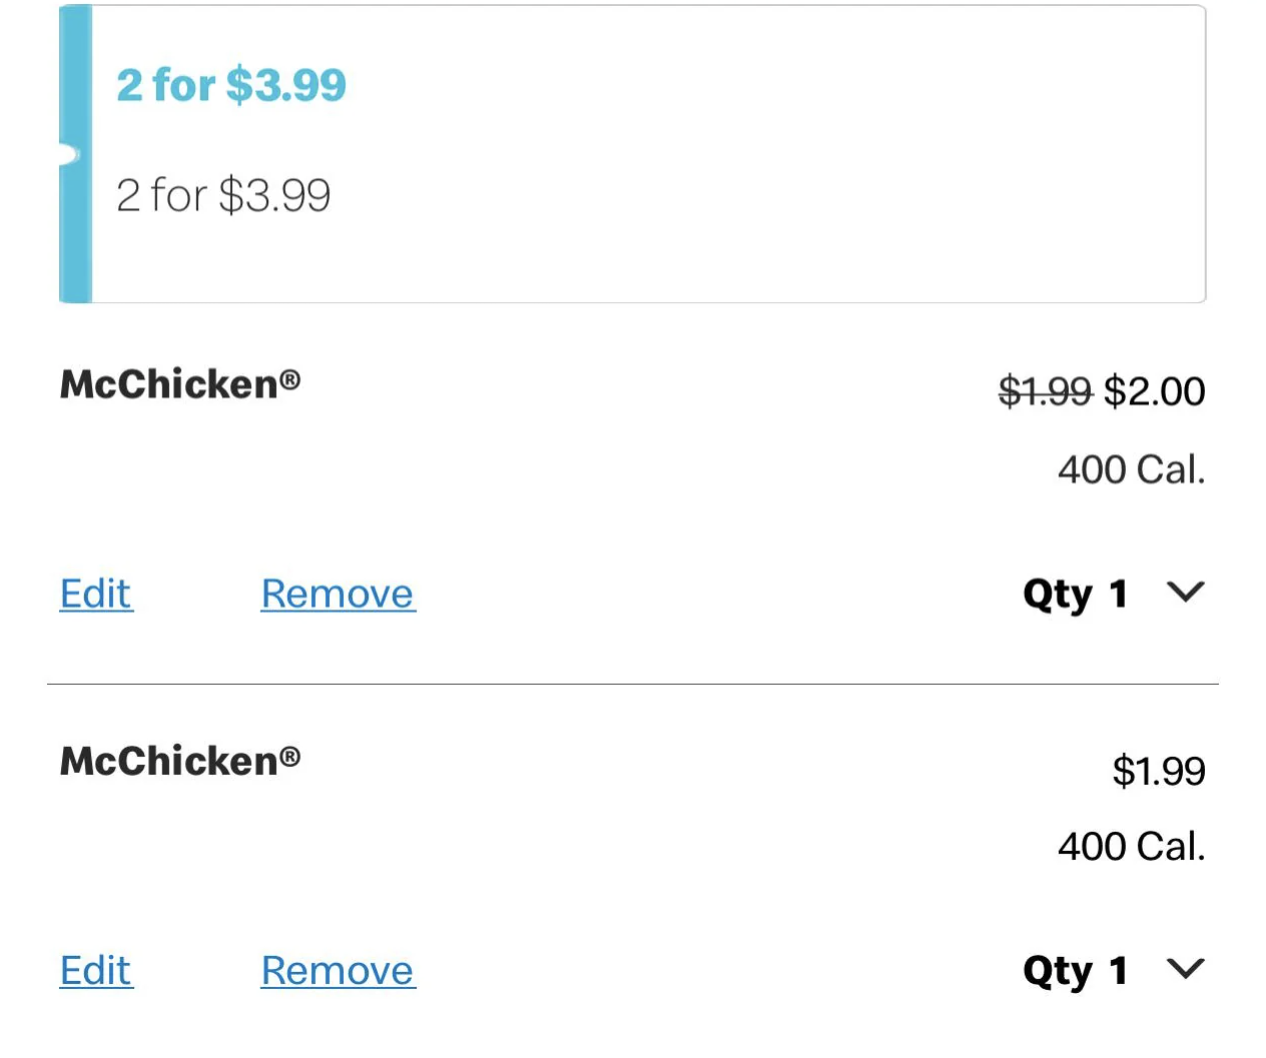 Screenshot of a digital food order showing a special offer for 2 items at $3.99 and a single item priced at $1.99 with a quantity option